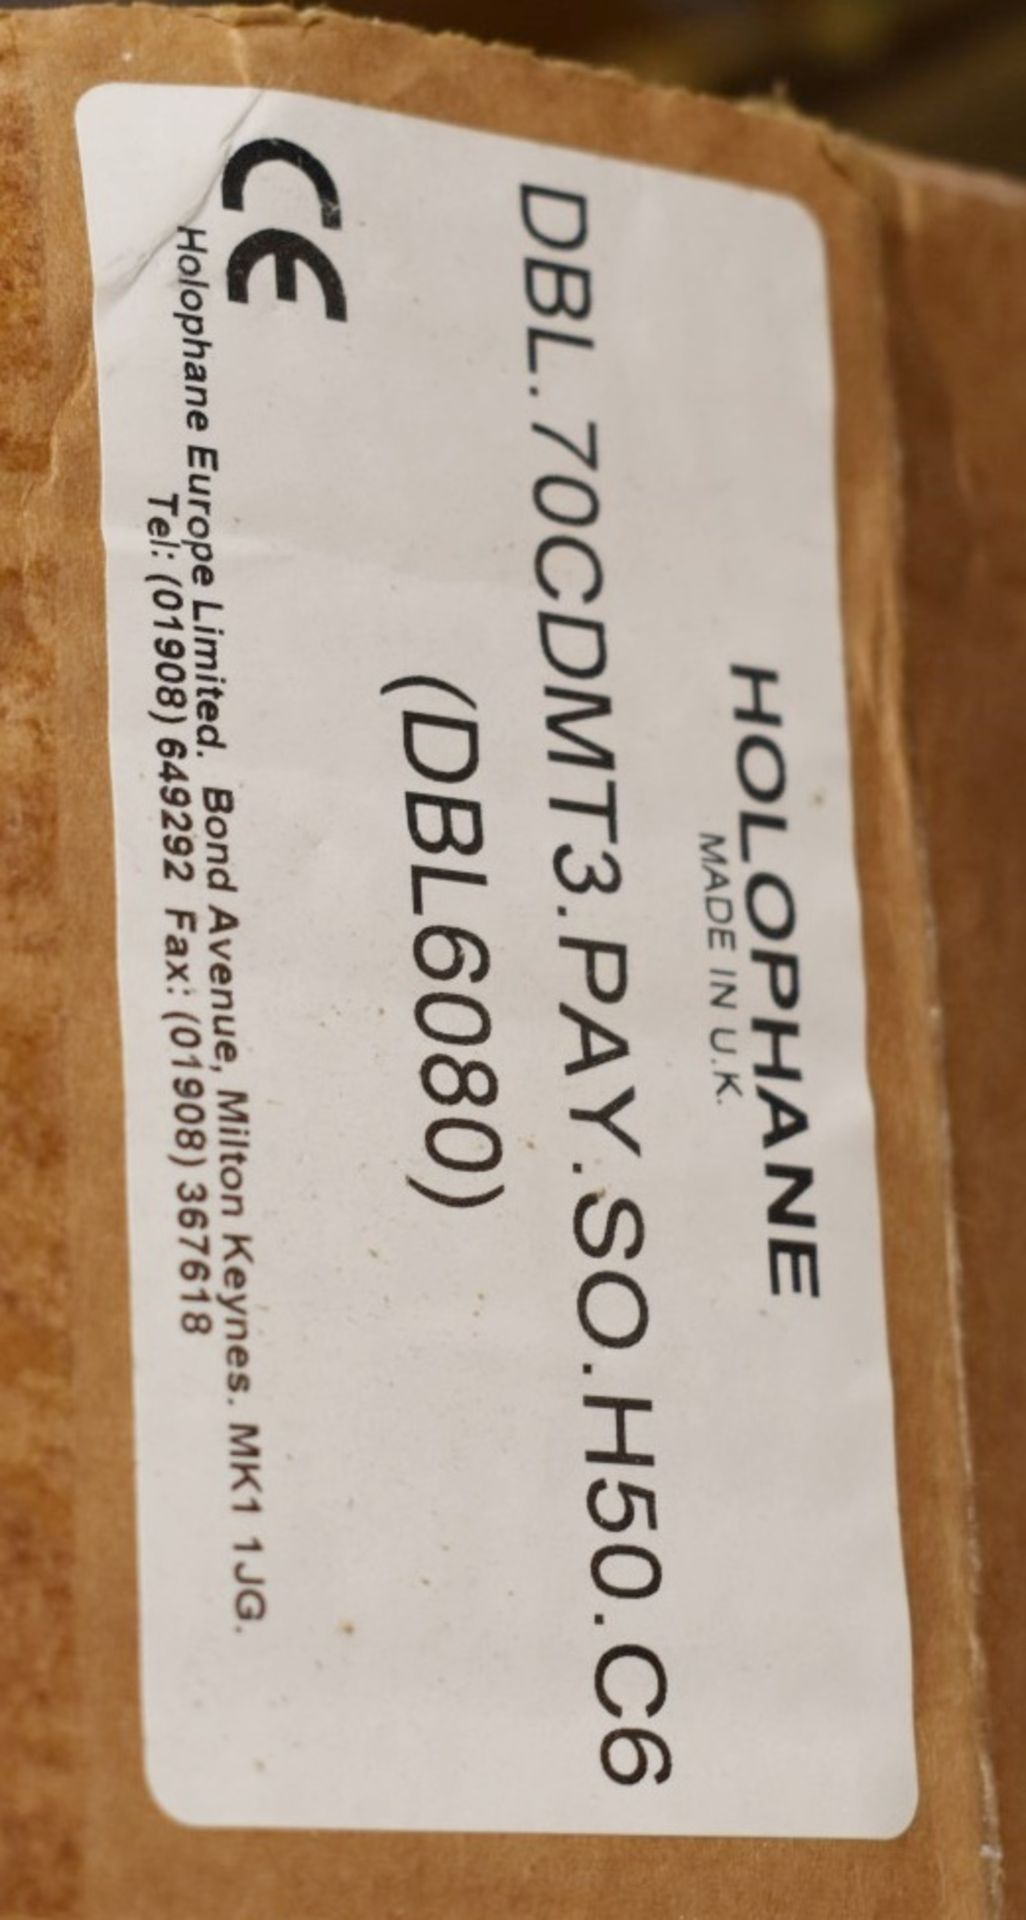 1 x Holophame DBL6080 Industrial Light Fitting - New Boxed Stock - Made in the UK - Image 3 of 5